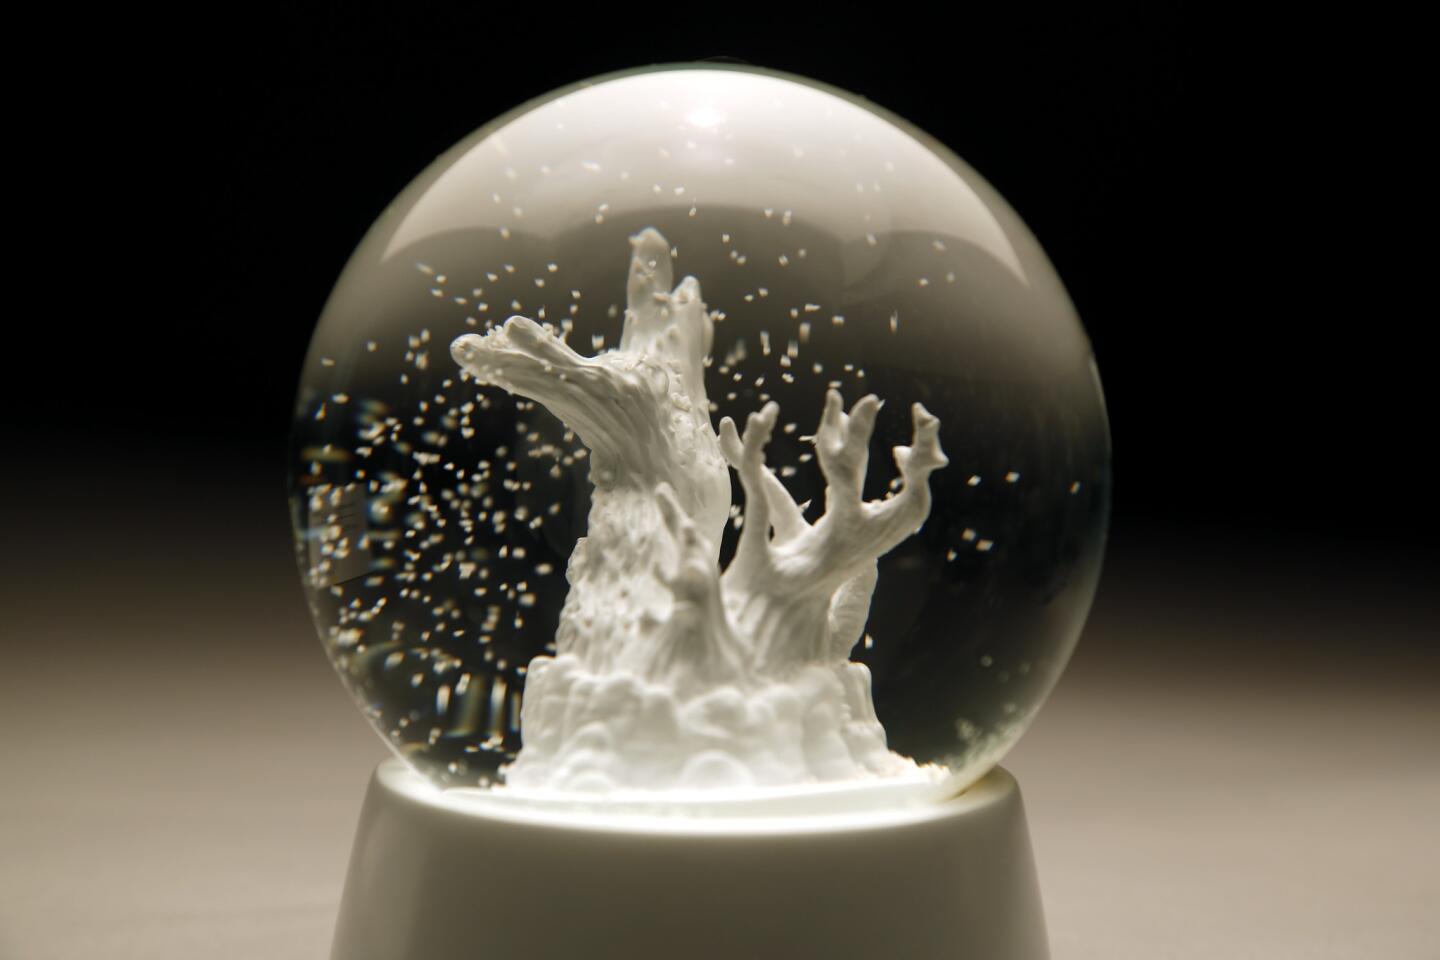 Artist Jeff Weiss commemorates the memory of a tree named Prometheus in a snow globe containing an ethereal white rendering of the gnarled bristlecone pine that lived for roughly 5,000 years in eastern Nevada.